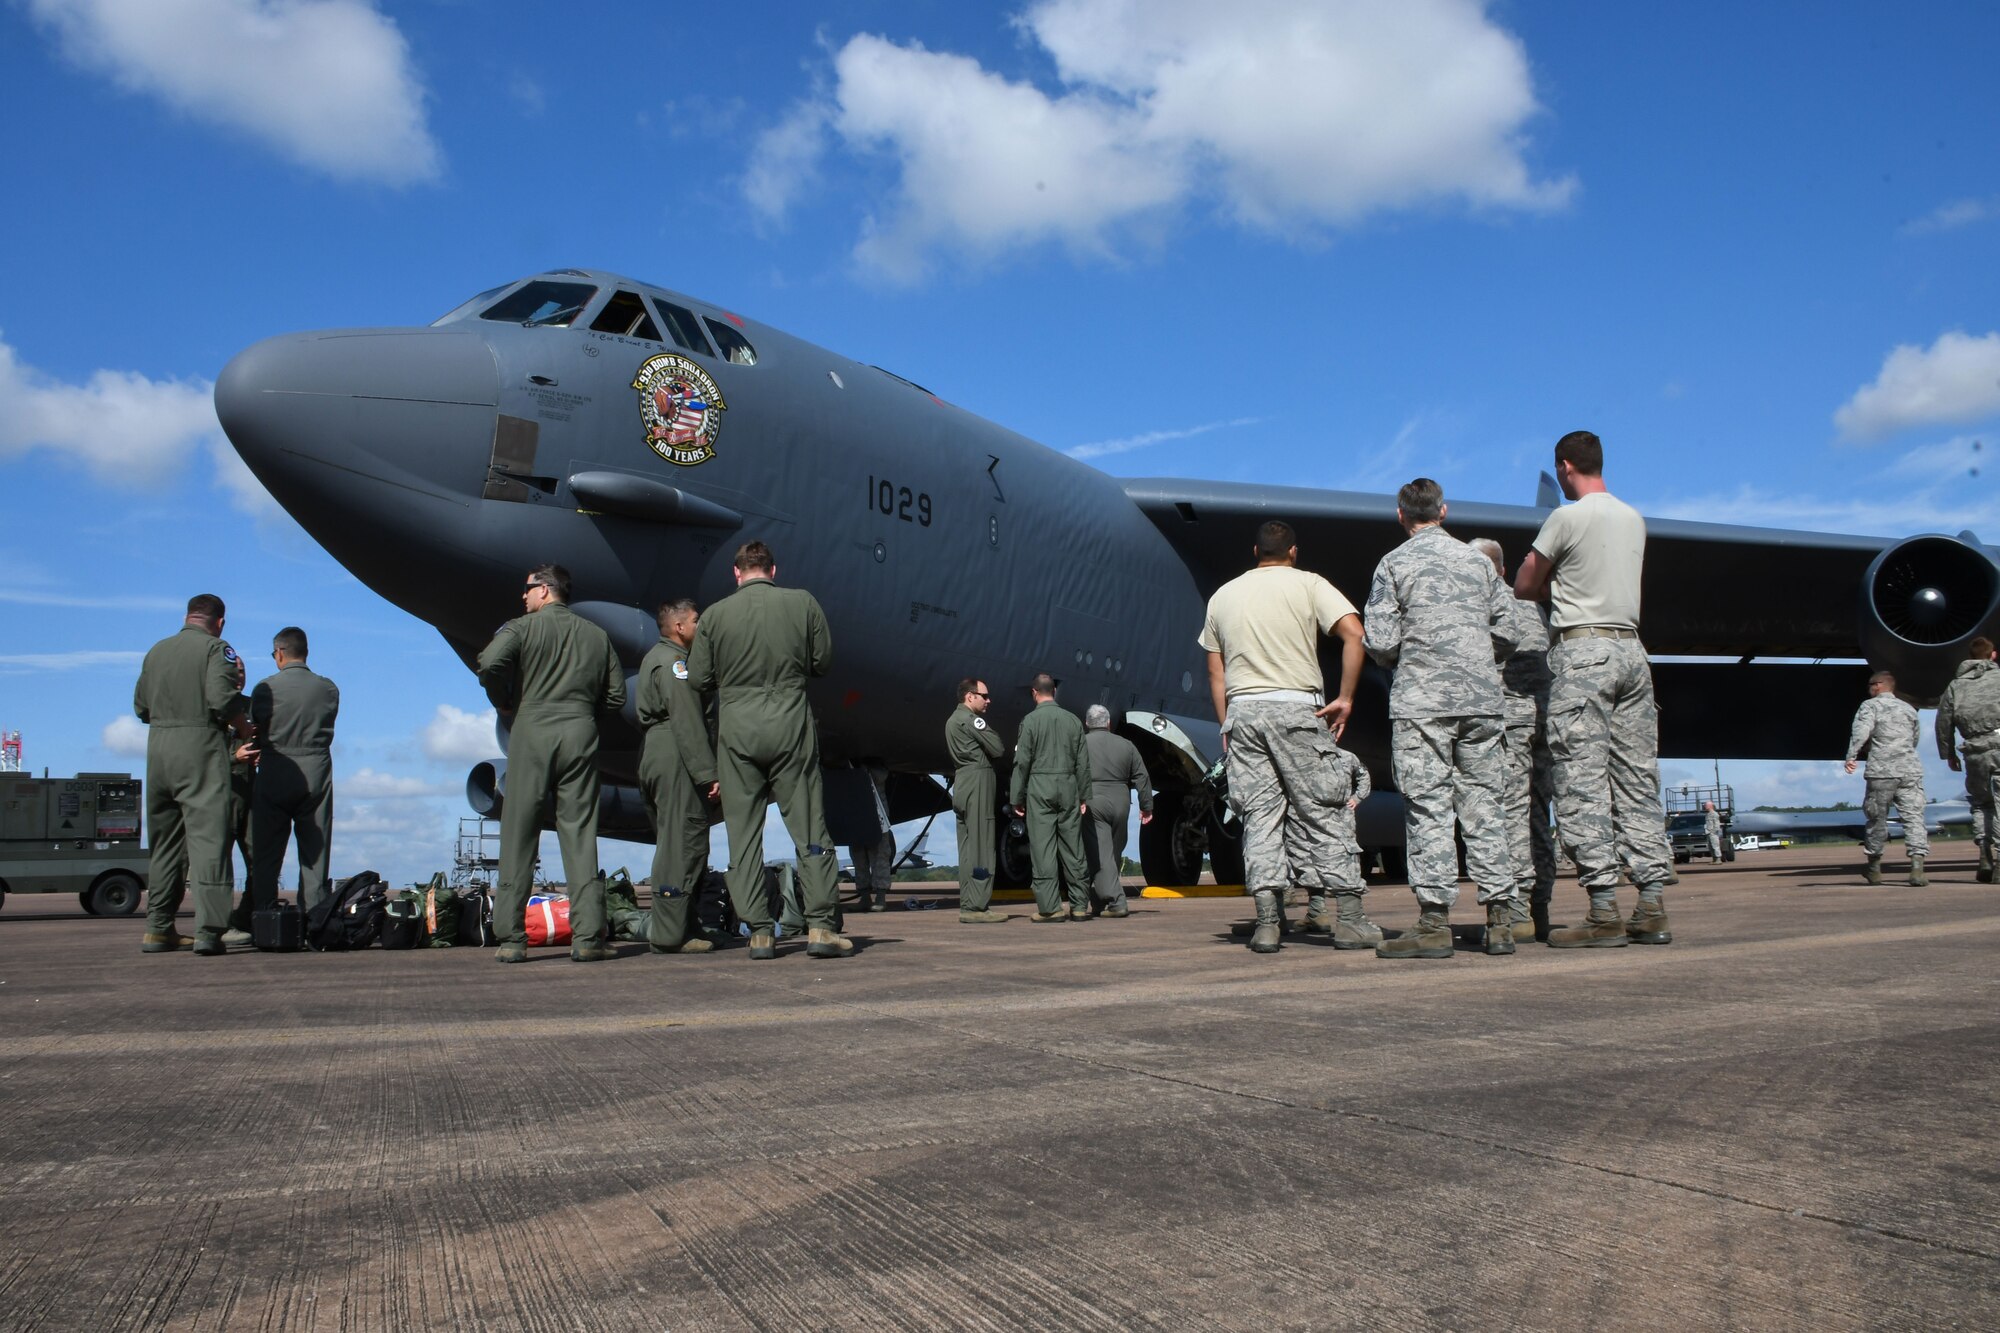 Airmen from the 307th Bomb Wing, 7th BW and 2nd BW gather around a recently arrived B-52 Stratofortress at Royal Air Force Fairford, United Kingdom, Sep. 1, 2017.